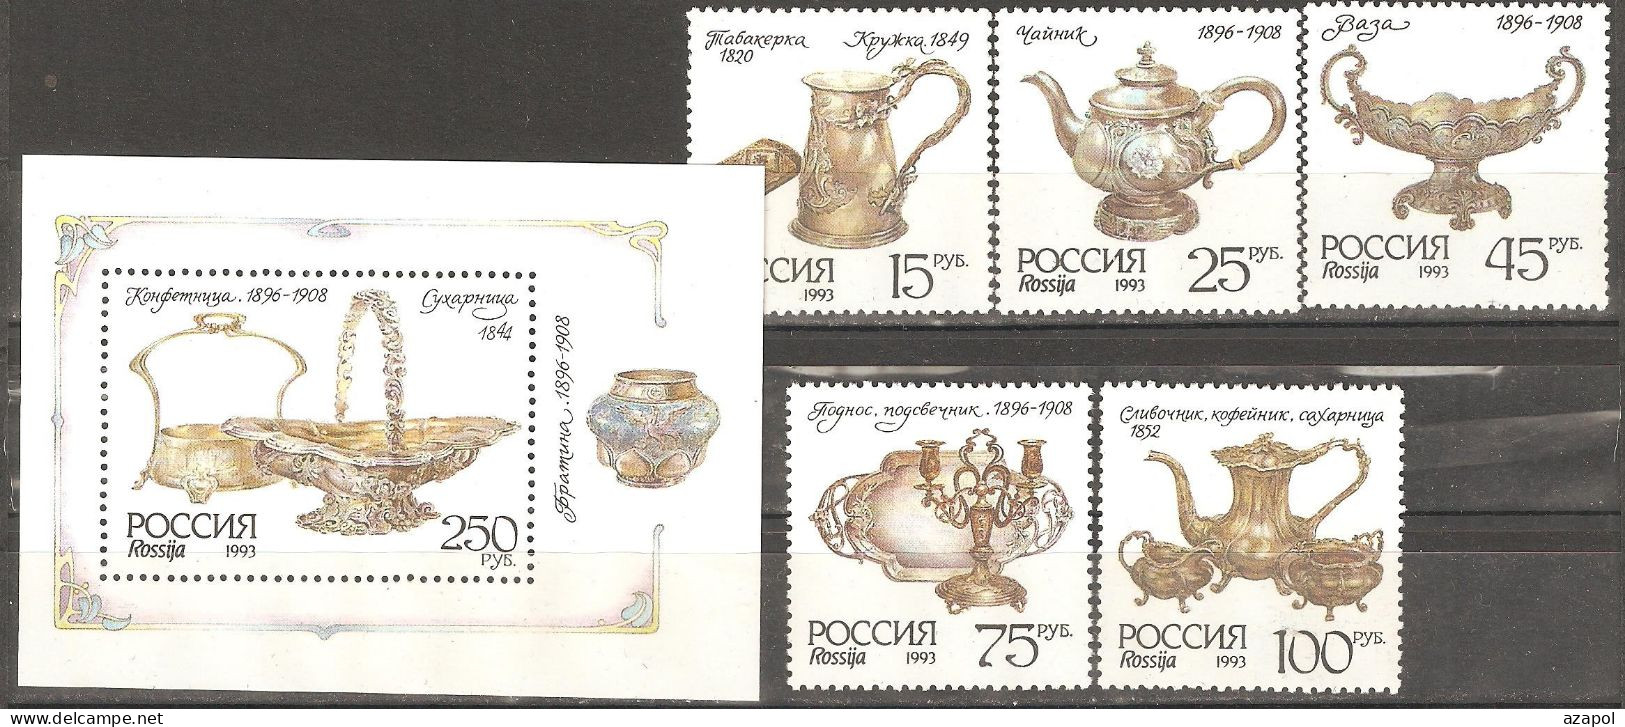 Russian Silverware: Full Set Of 5 Mint Stamps And Block, Russia, 1992, Mi#308-311, Bl-5, MNH - Museen